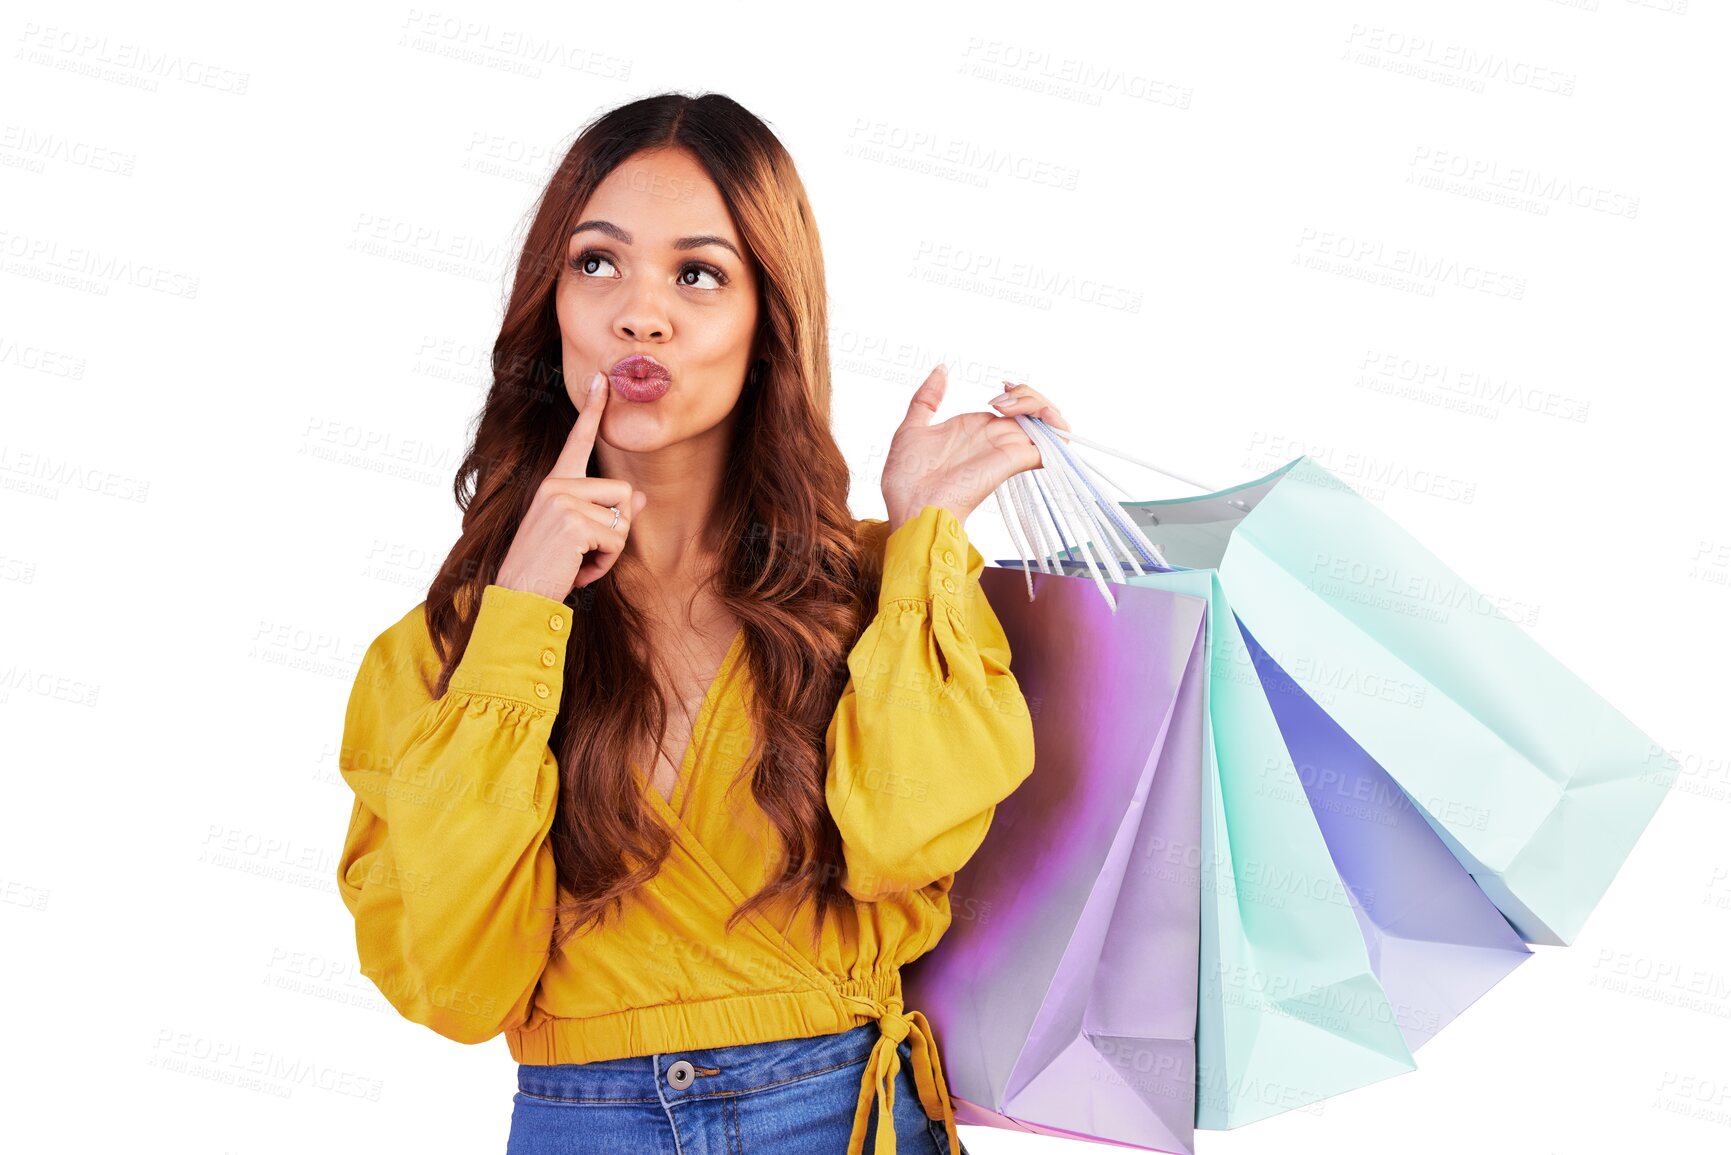 Buy stock photo Fashion, retail and thinking with woman and shopping bag on png for luxury, boutique and sale. Cosmetics, deal and store with customer isolated on transparent background for product and freedom